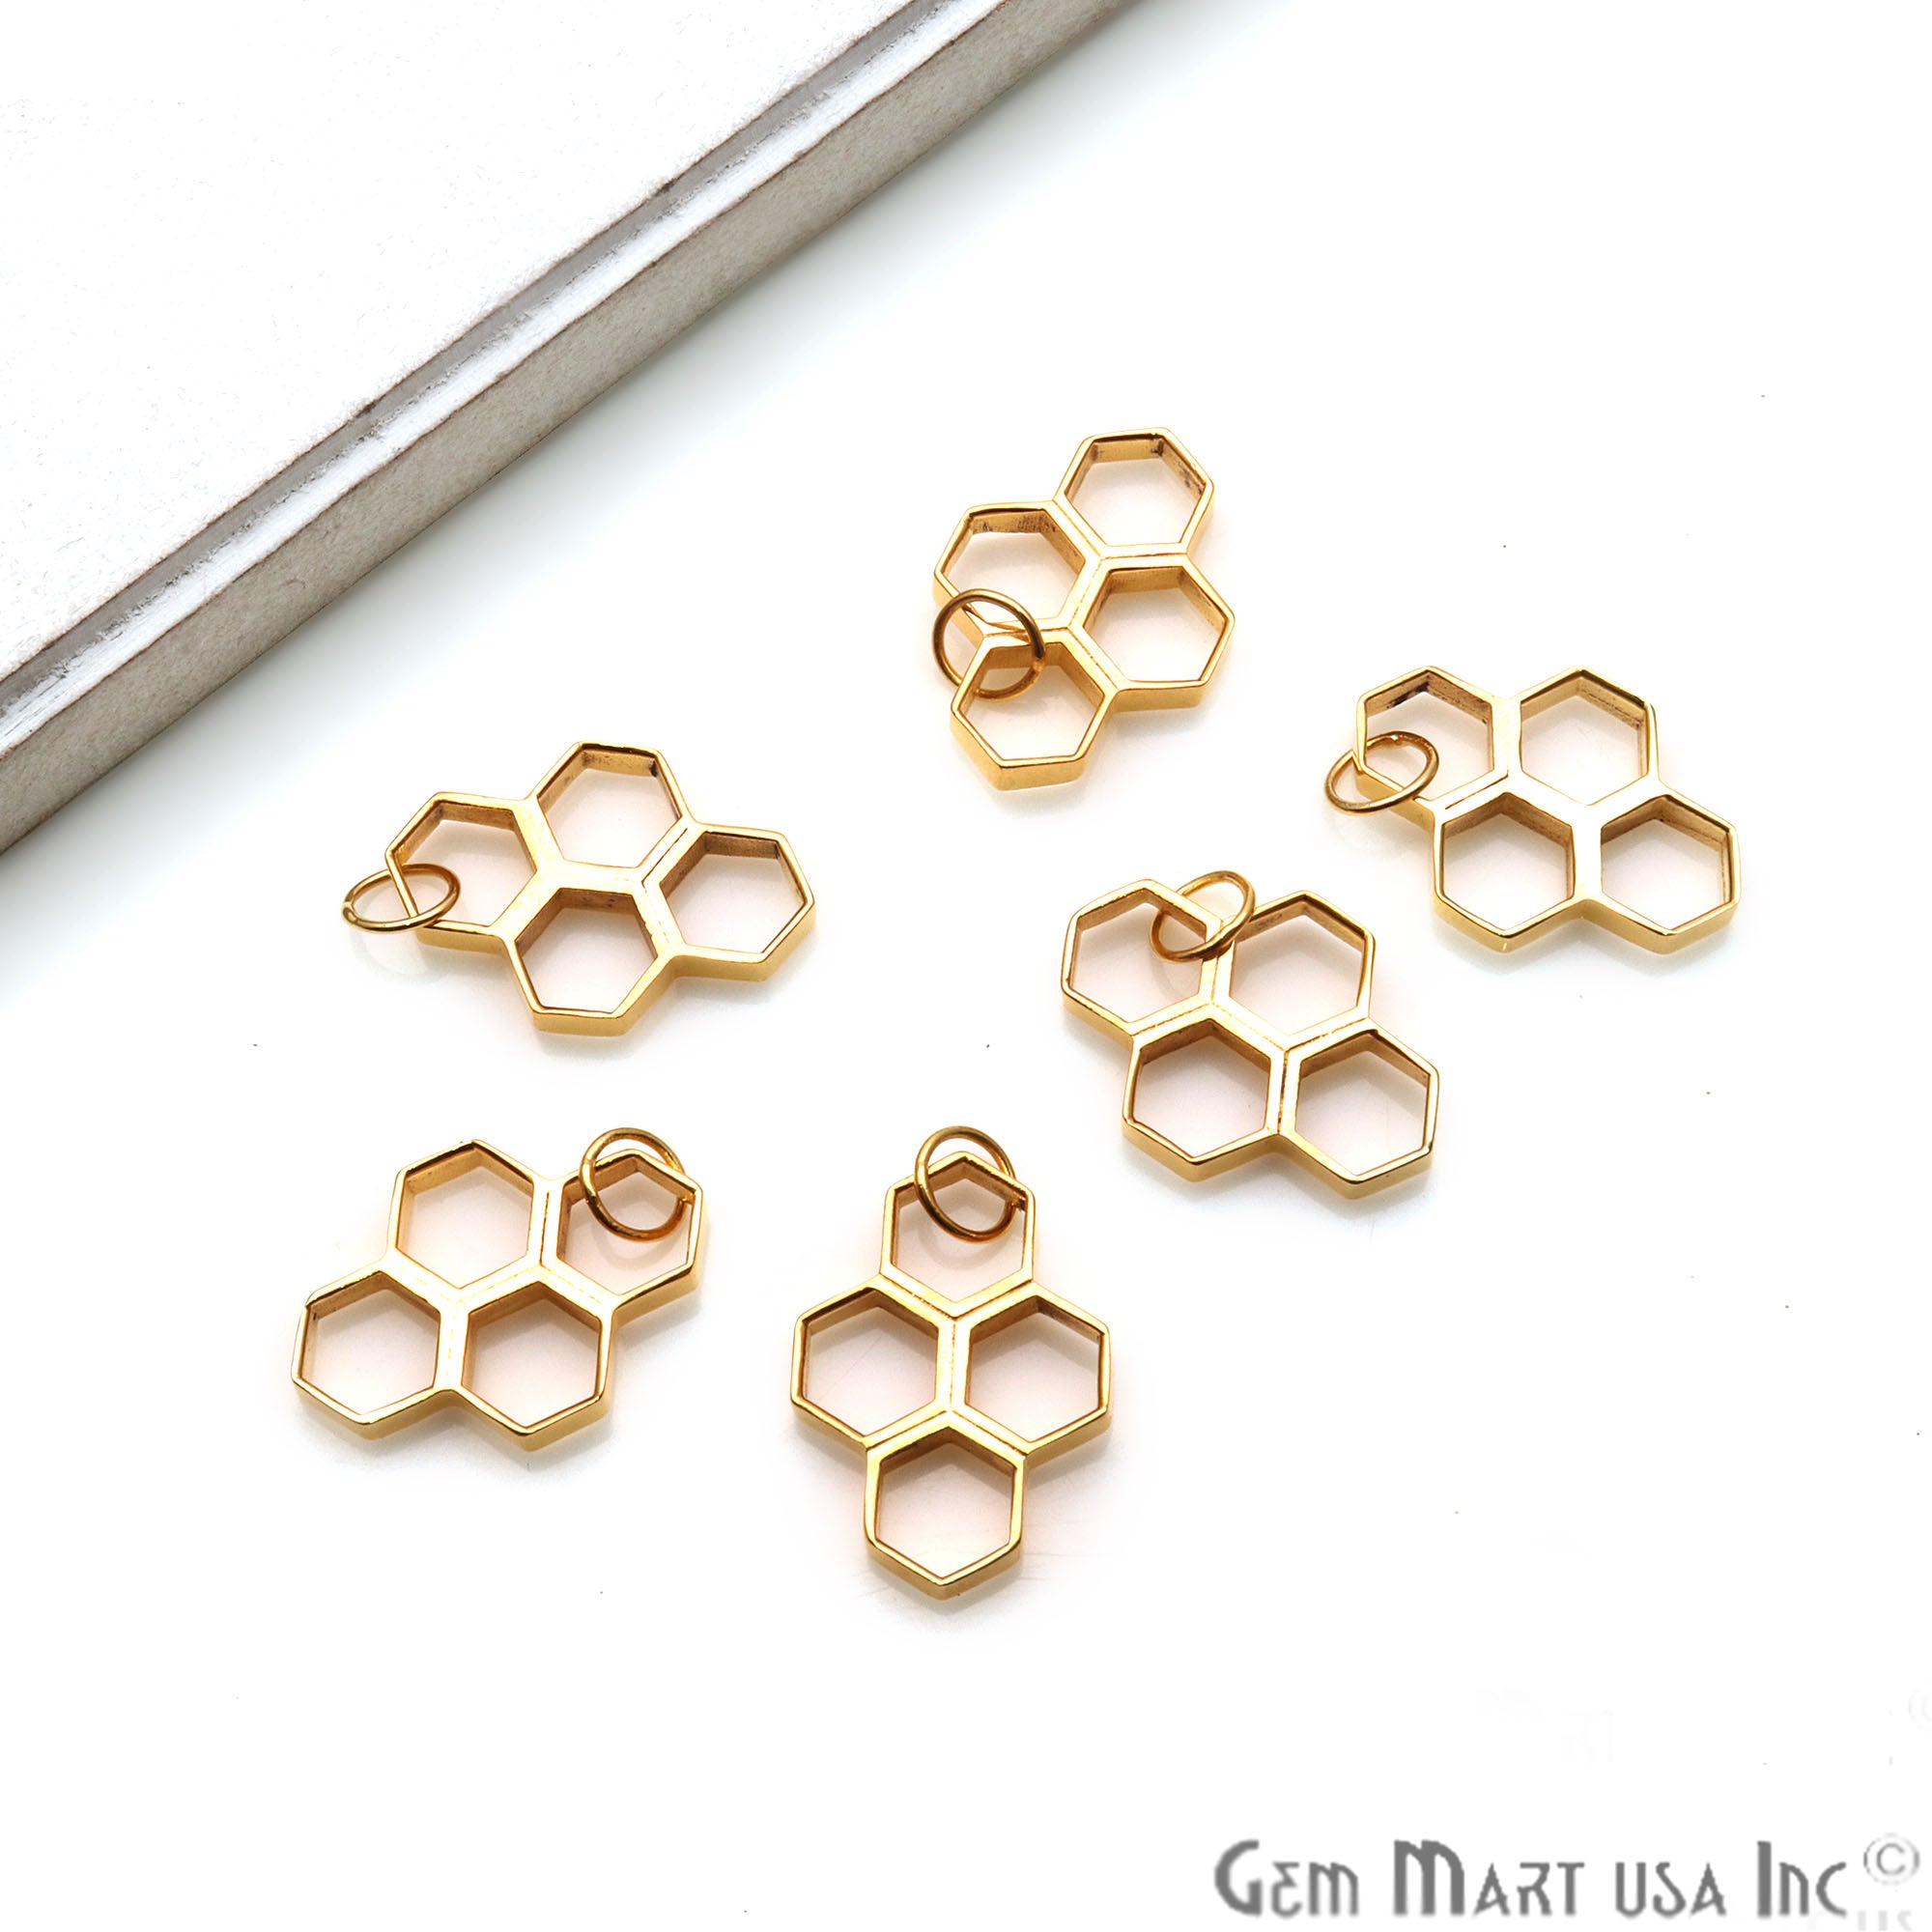 Hexagon Shaped 24x17mm Gold Plated Finding Charm, Four hexagon attached, Gold Jewelry Charm, Single Bail connector - GemMartUSA